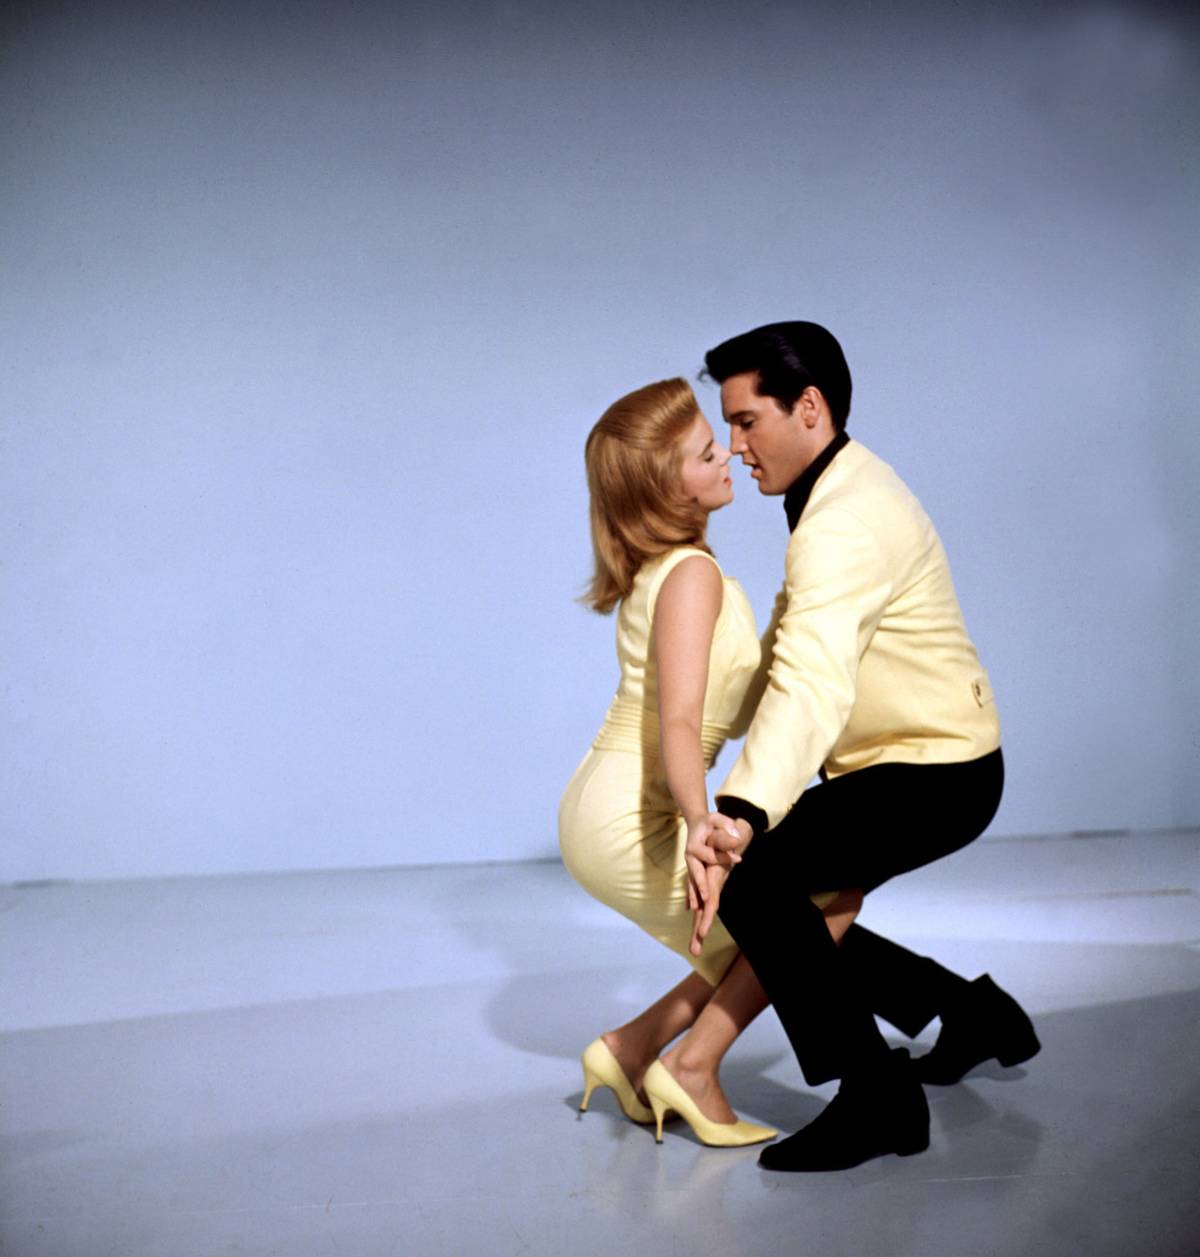 <p>Elvis and Ann-Margret met while filming <i>Viva Las Vegas</i> in 1963. Elvis was 28, having already appeared in 14 films; Ann-Margret, 22, had gained fame for her role in <i>Bye Bye Birdie</i>. </p> <p>Years later, she remembered their first meeting: an empty soundstage with only a piano.</p>